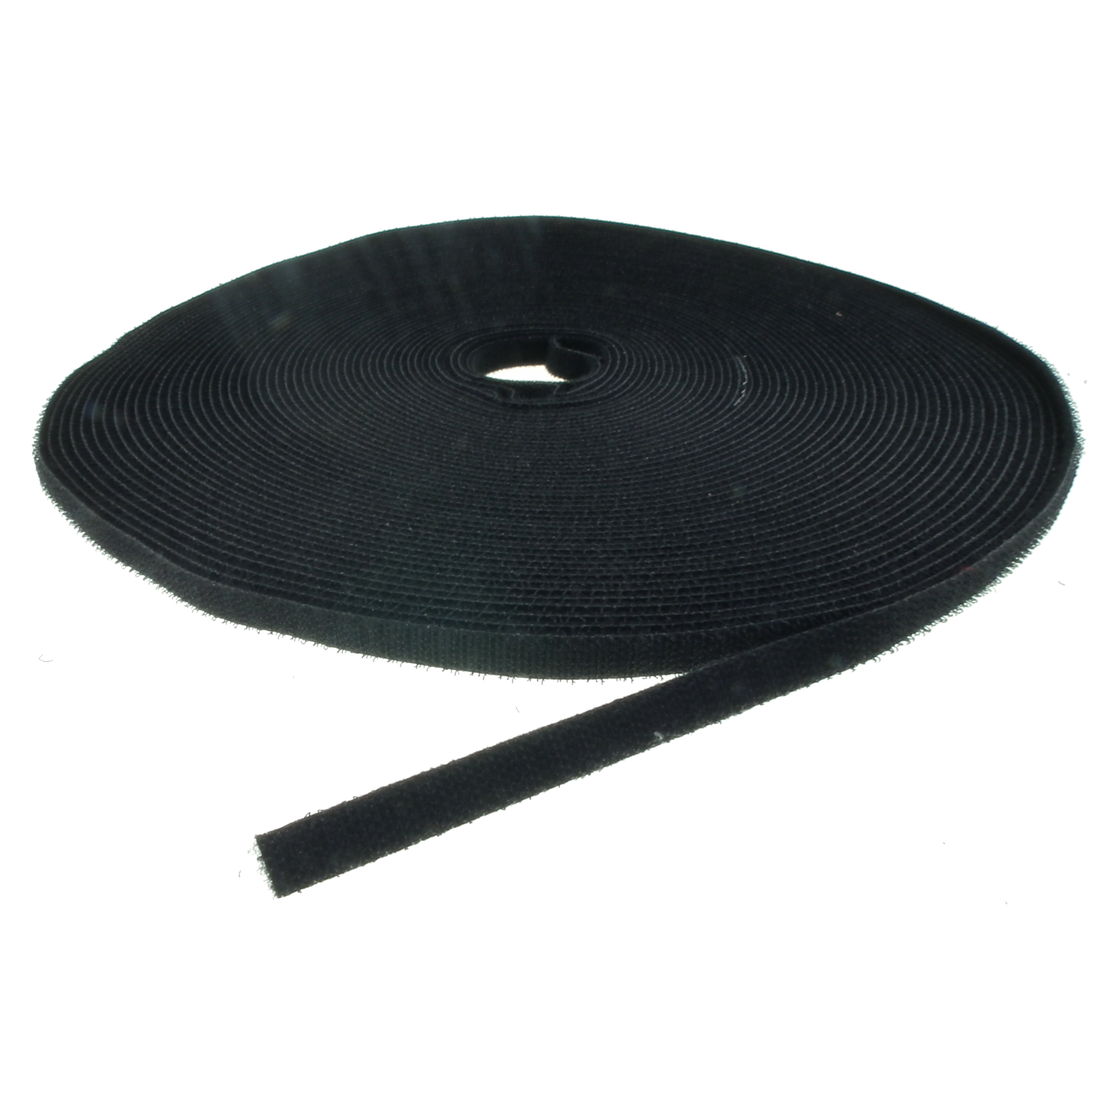 Double sided velcro (Black) 10mm wide | Component-Shop